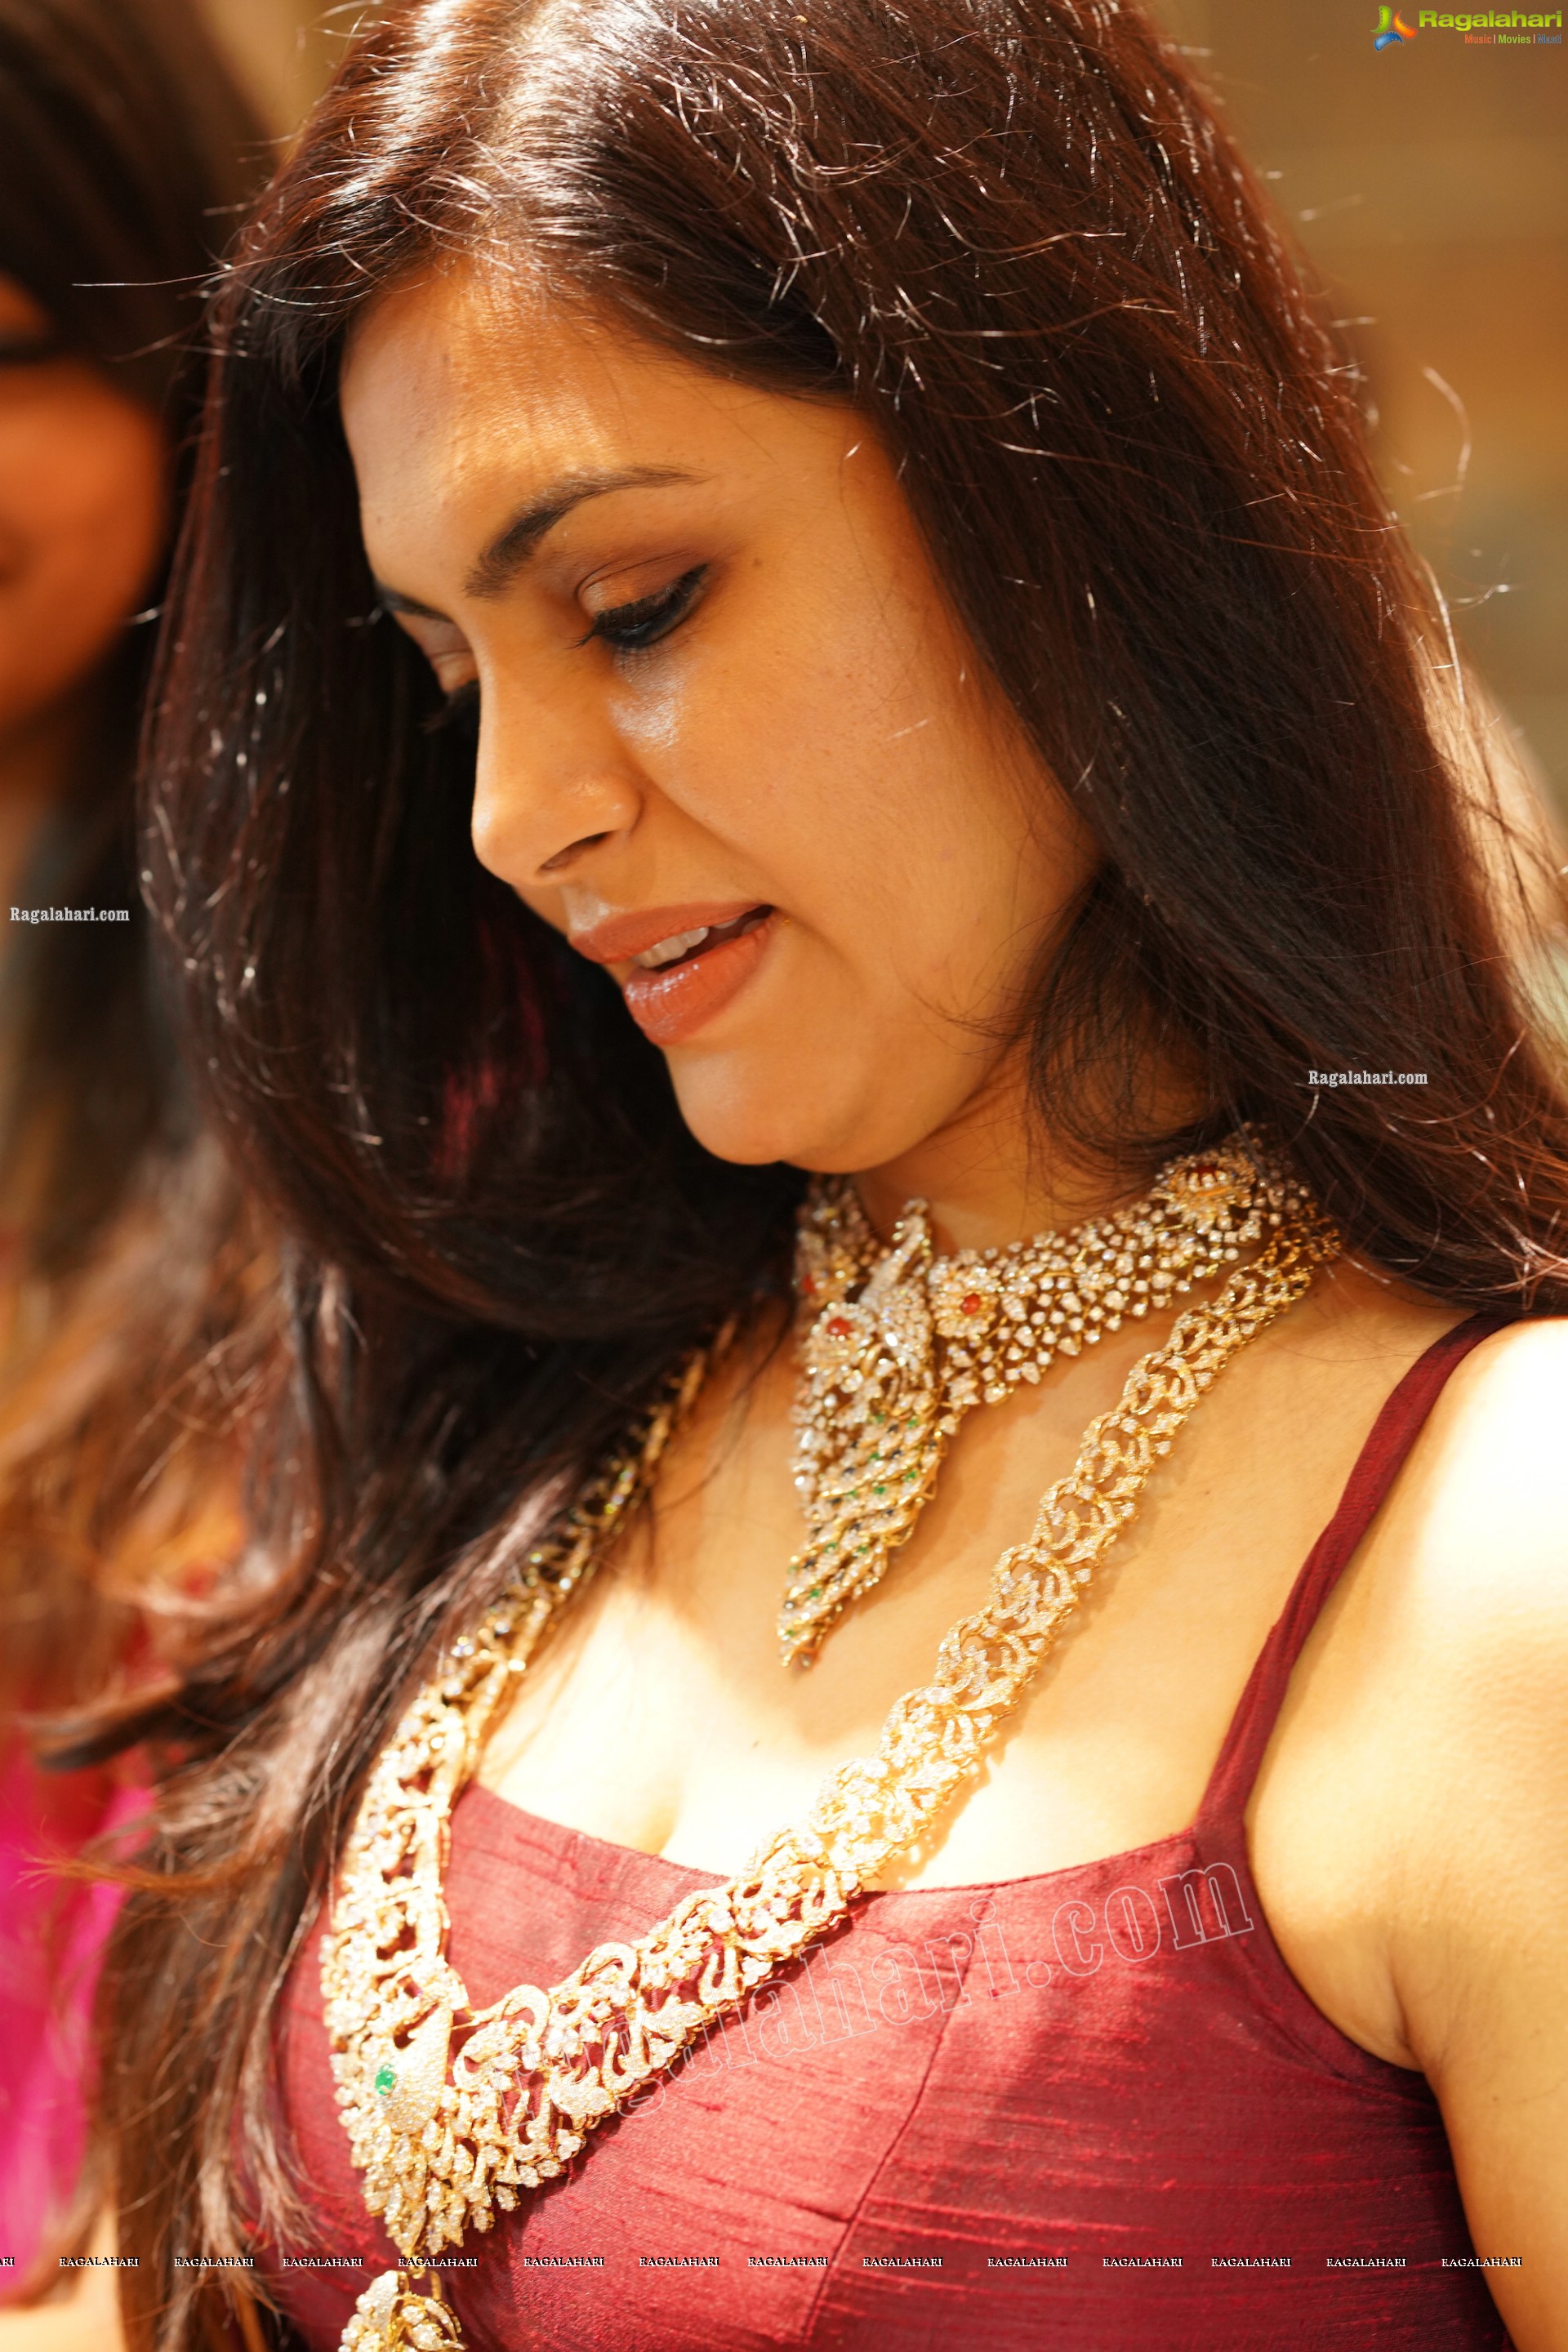 Sonu Gowda at Kirtilals Trunk Show at The Jayanthi Ballal Store Mysore, HD Photo Gallery